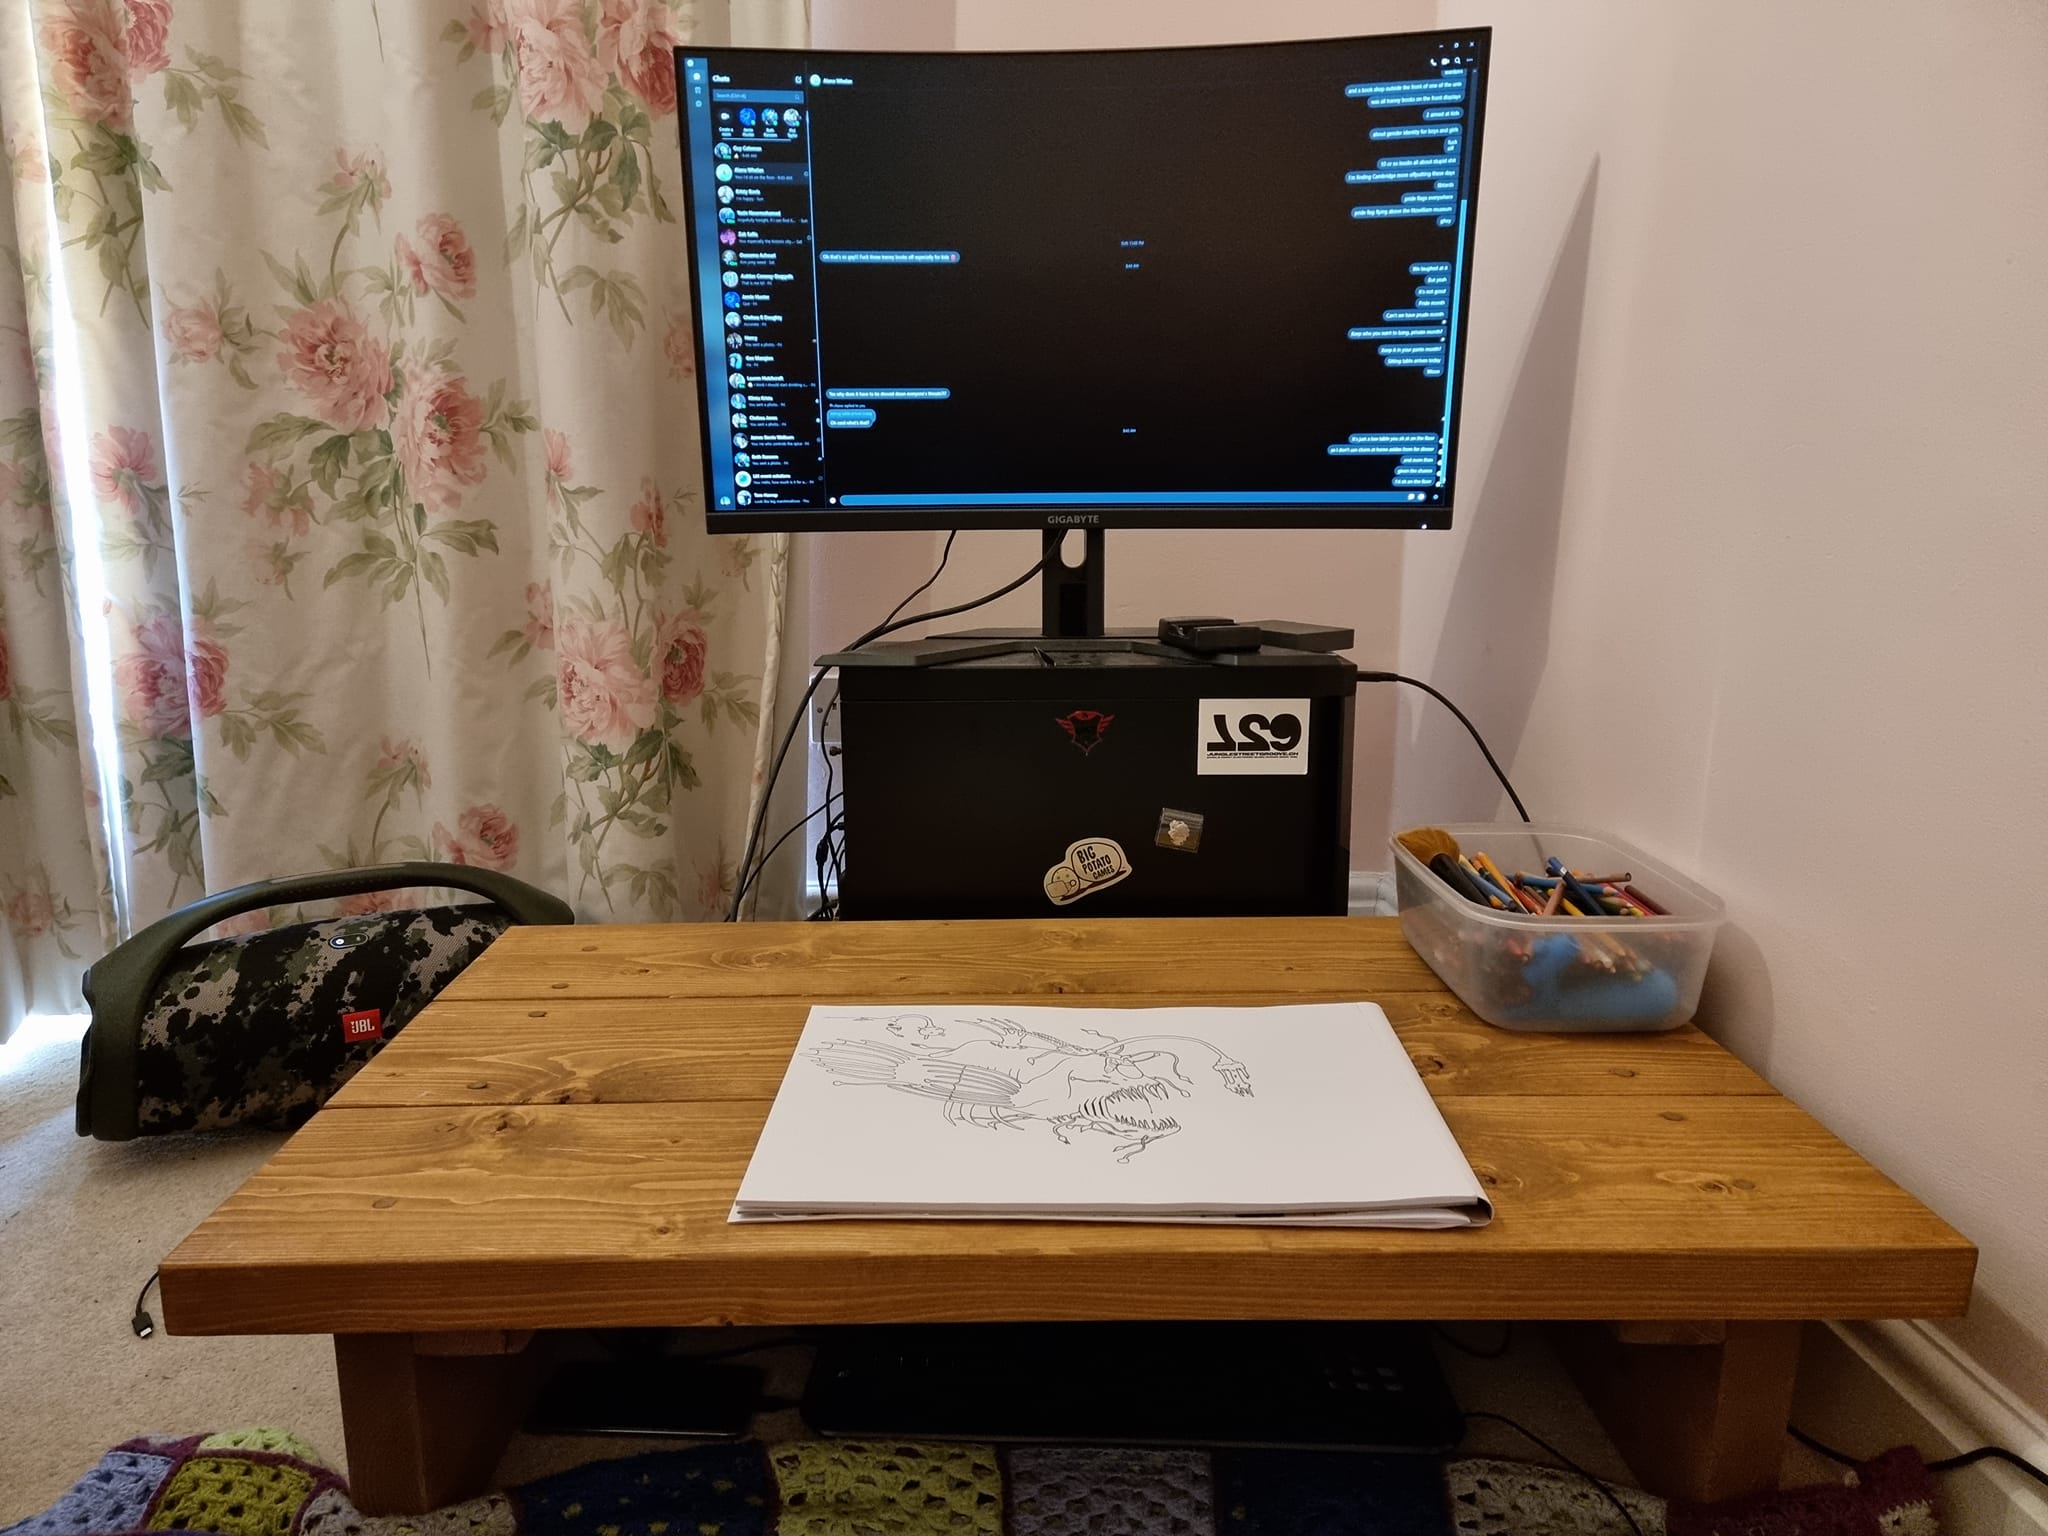 My sitting table arrived